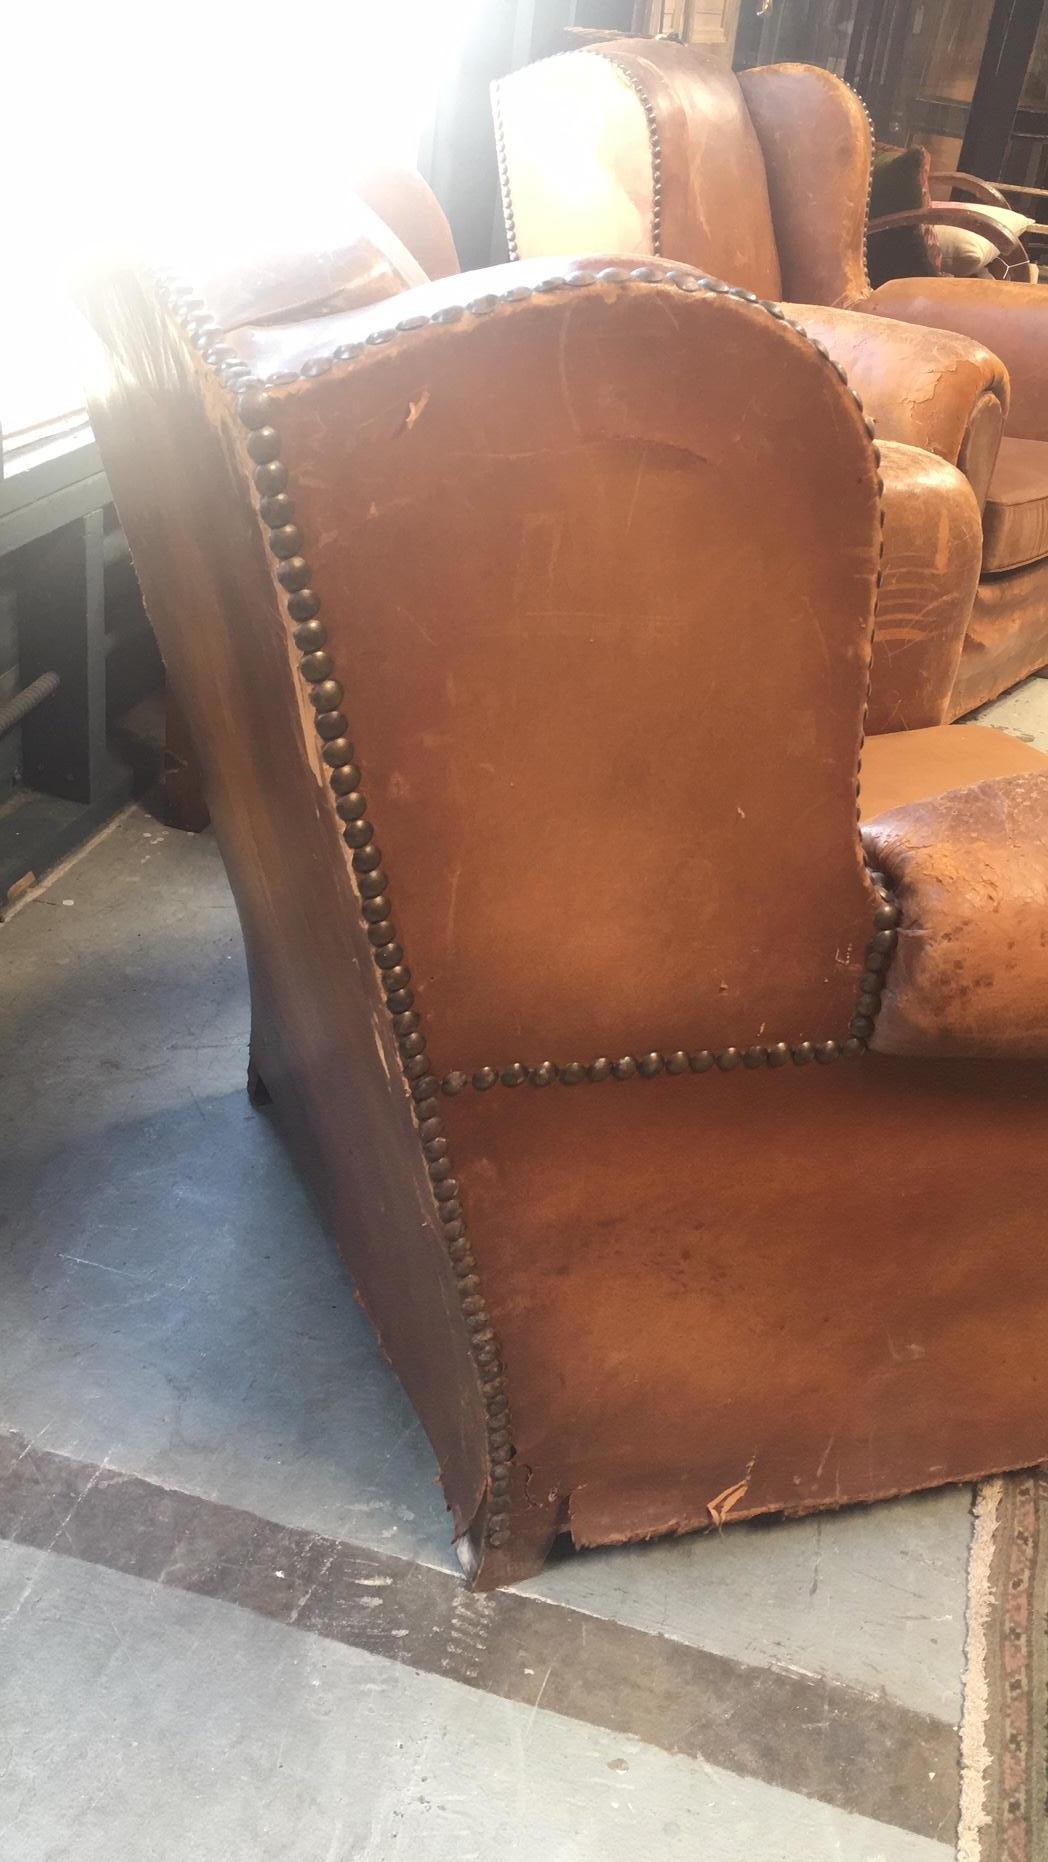 Antique pair of club chairs from the 1920s. Leather with studs. Seat cushion is not leather but rather fabric.